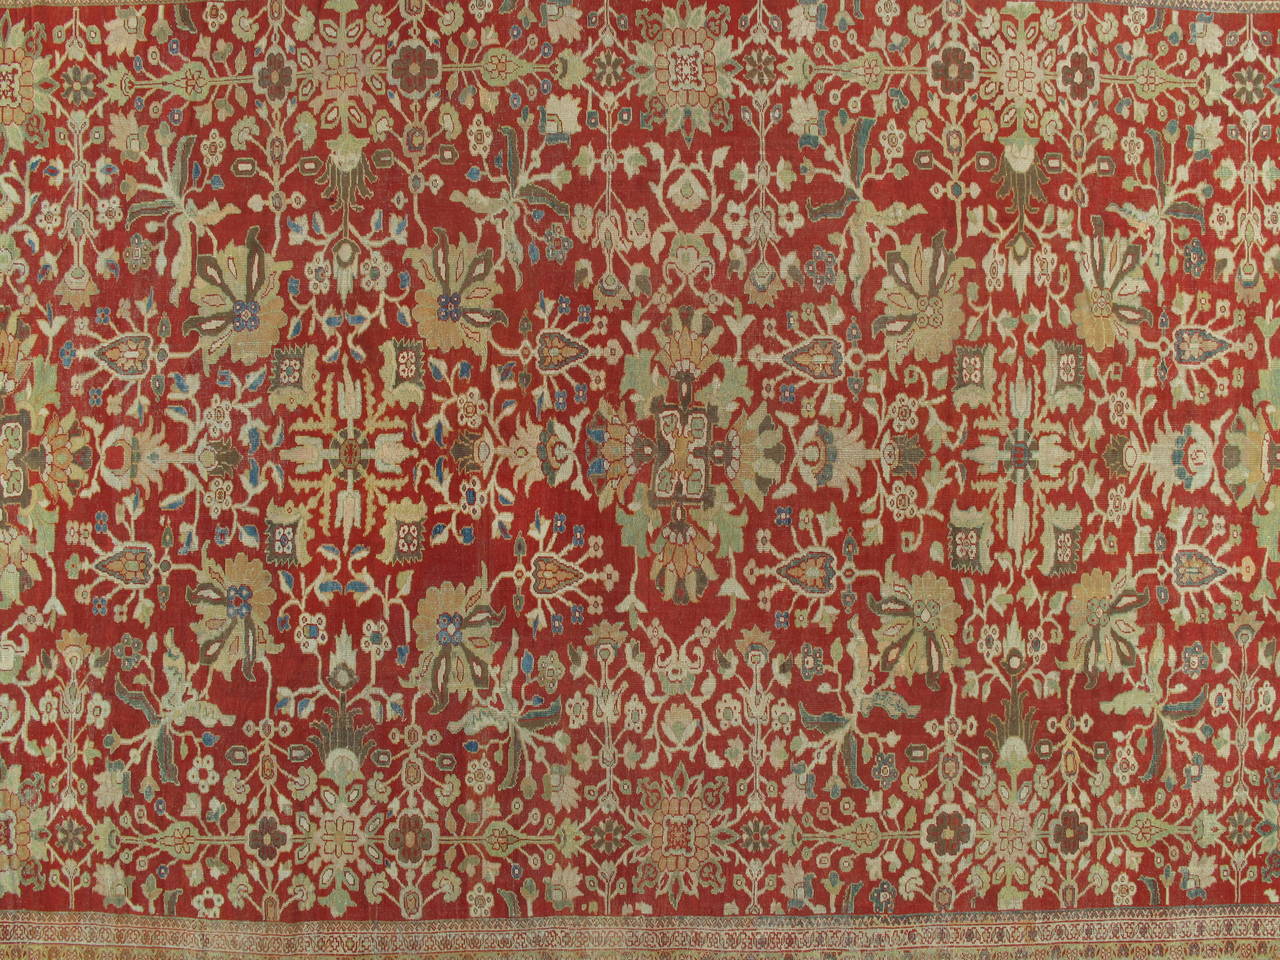 Hand-Knotted Antique Persian Sultanabad Carpet, Handmade Oriental Rug, Red, Green, Gold, Fine